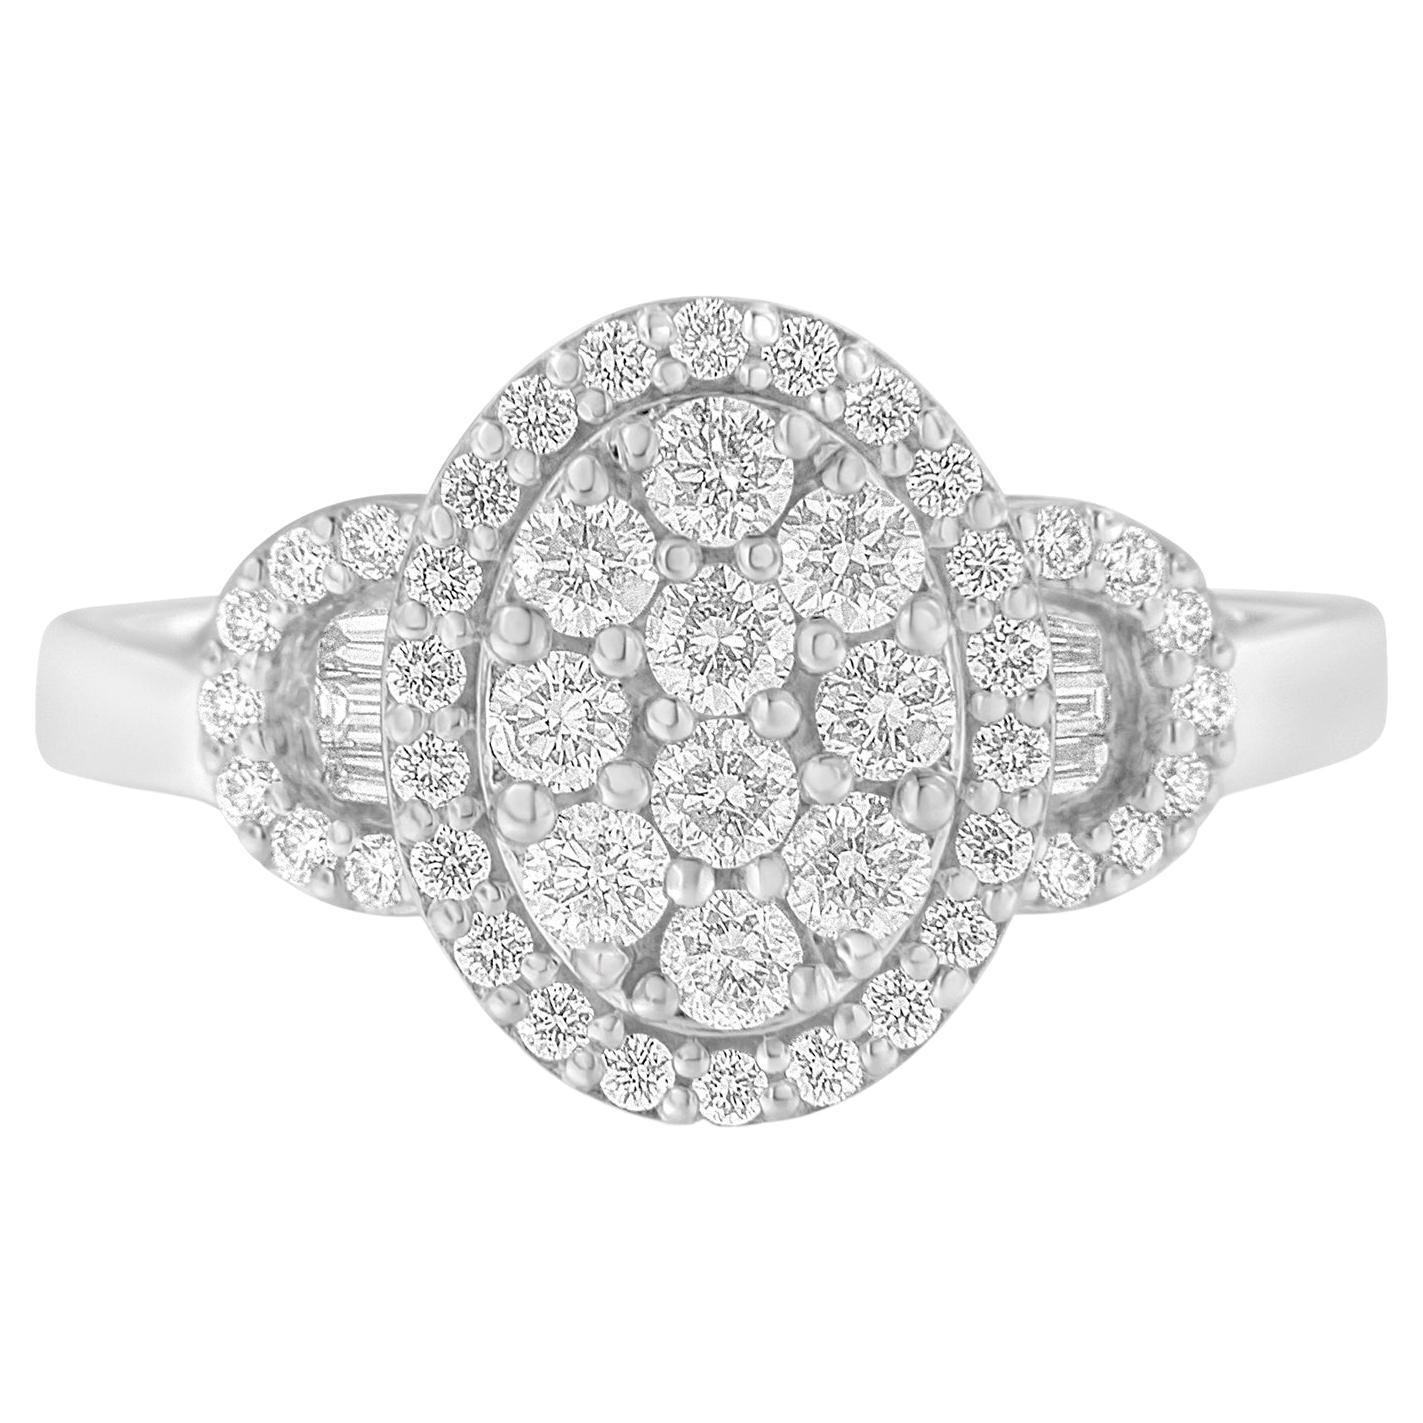 For Sale:  10K White Gold 1.0 Ct Diamond Cluster with Halo Vintage-Inspired Statement Ring